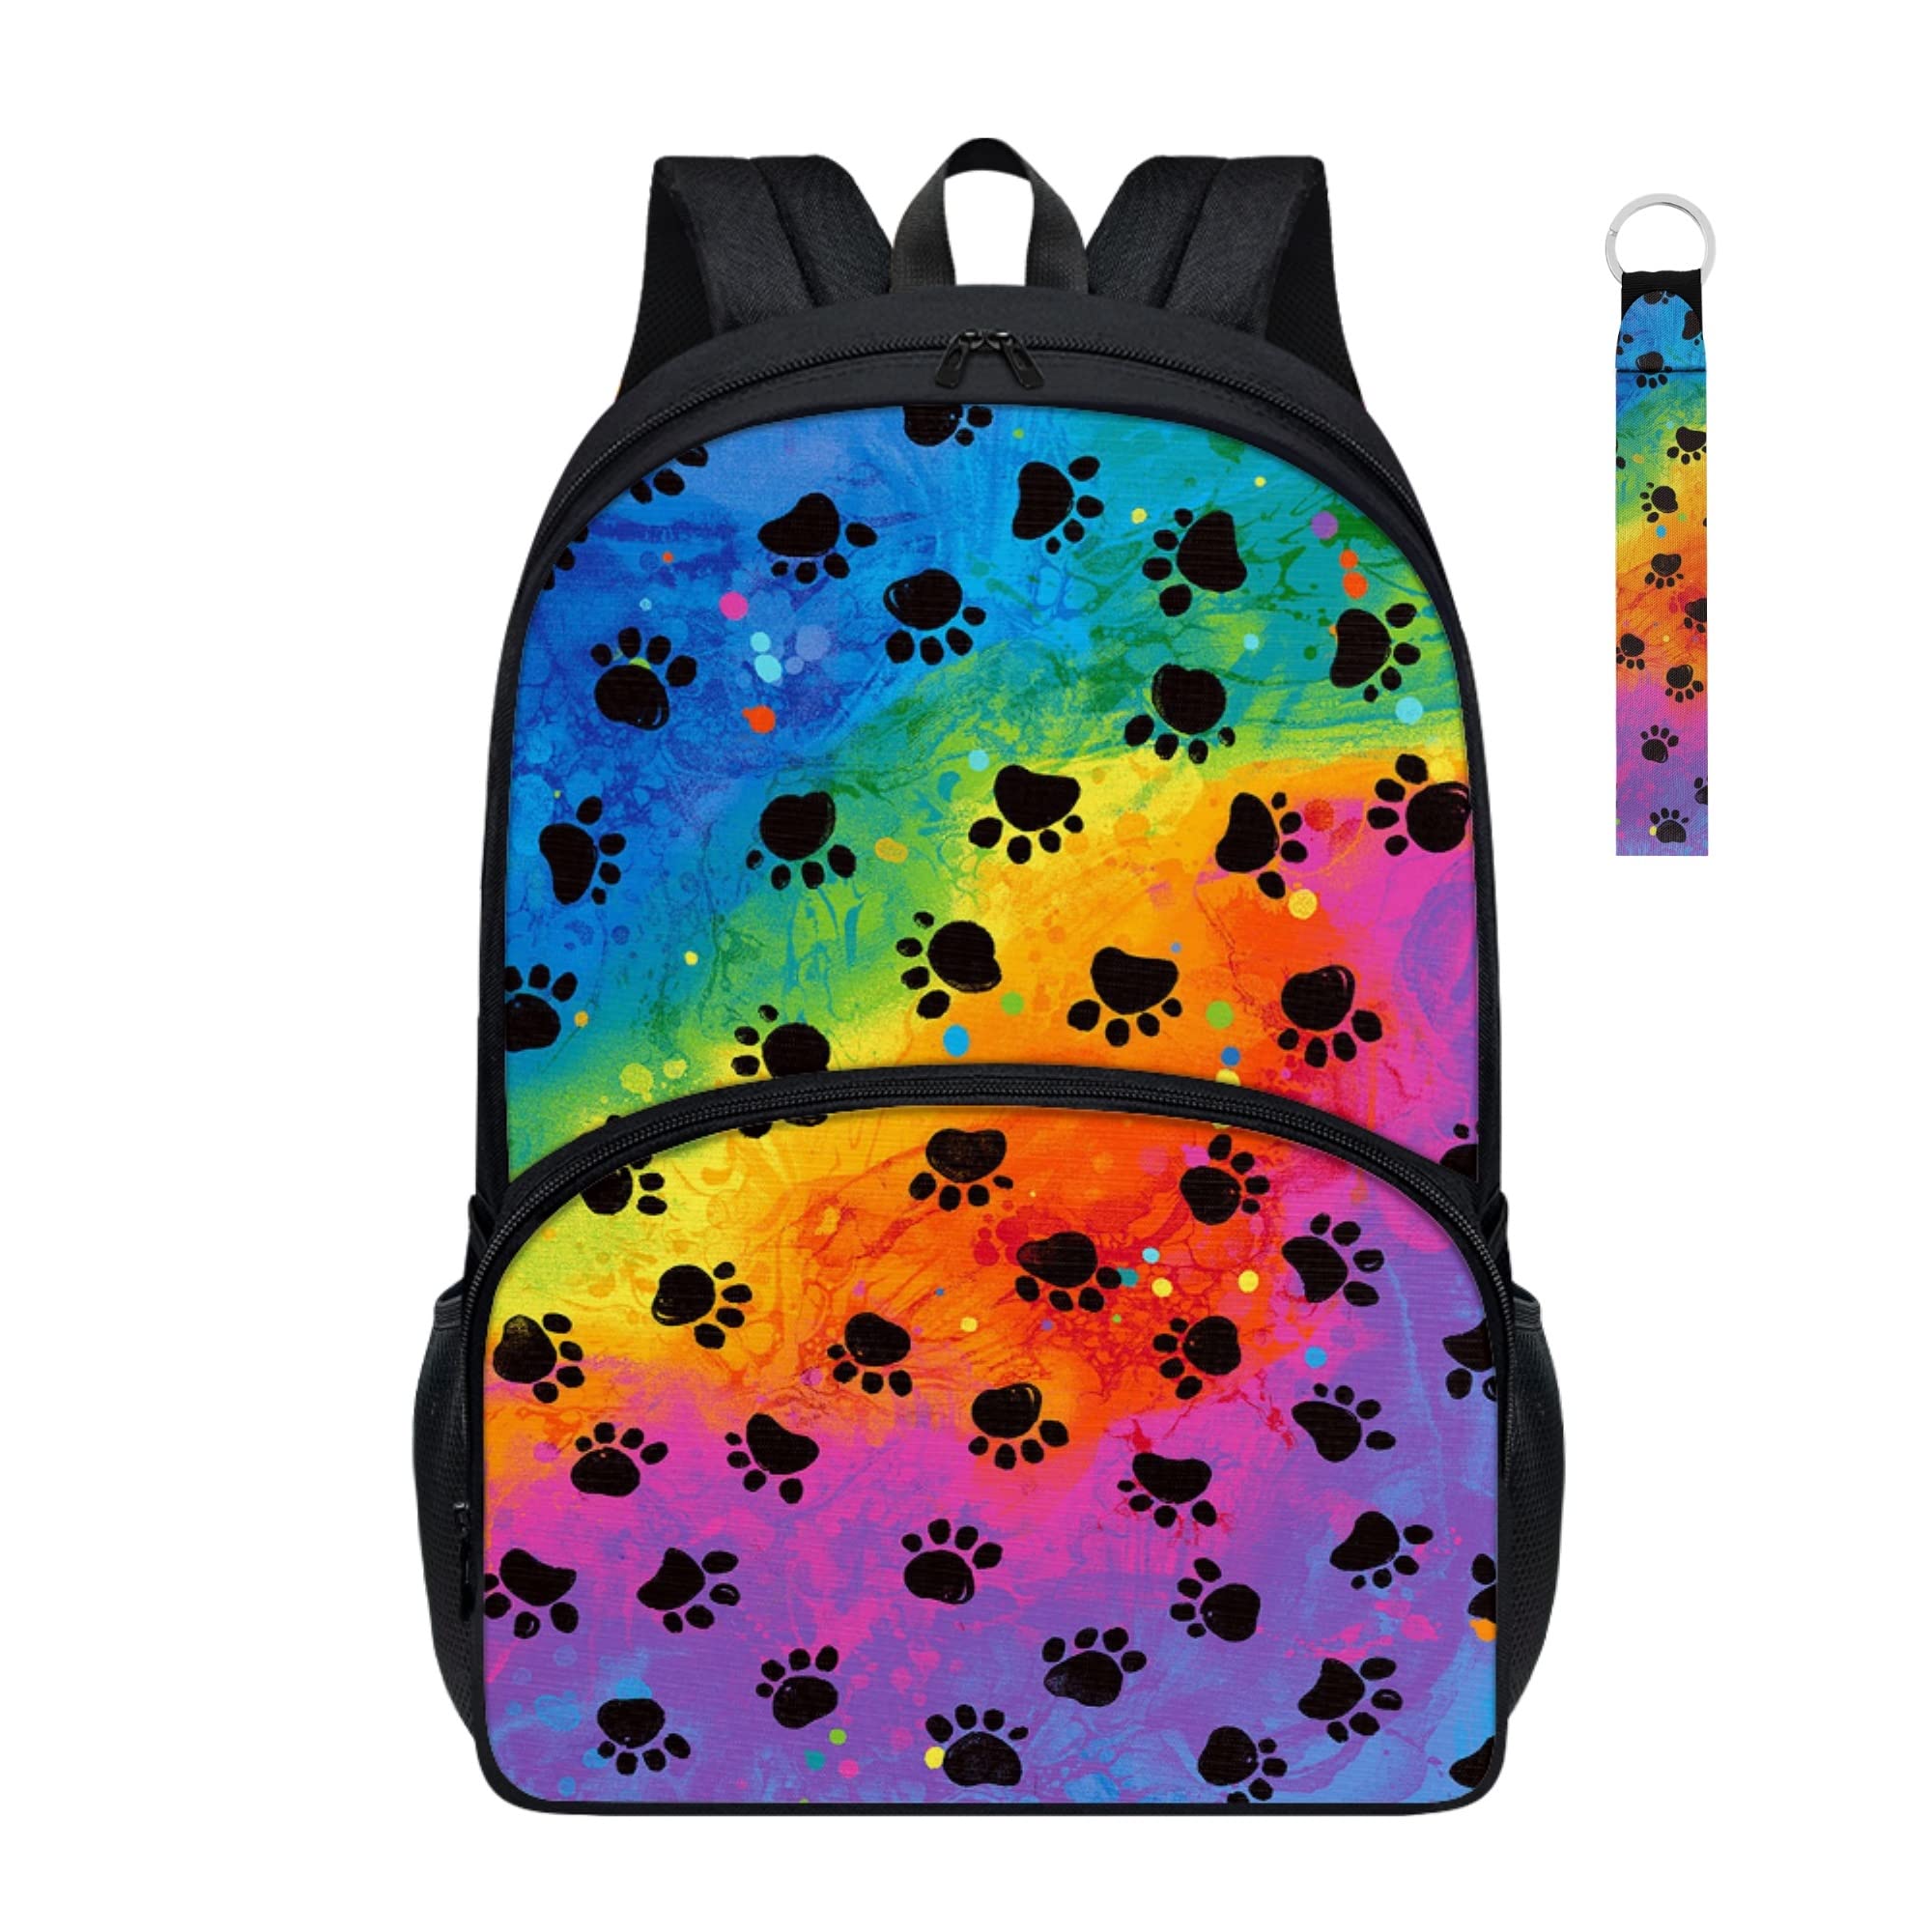 PORCLAY Rainbow Paw Print School Backpack for Kids Girls Boys Colorful Elementary Bookbag Preschool Cute Book Bag High School Lightweight with Laptop Compartment